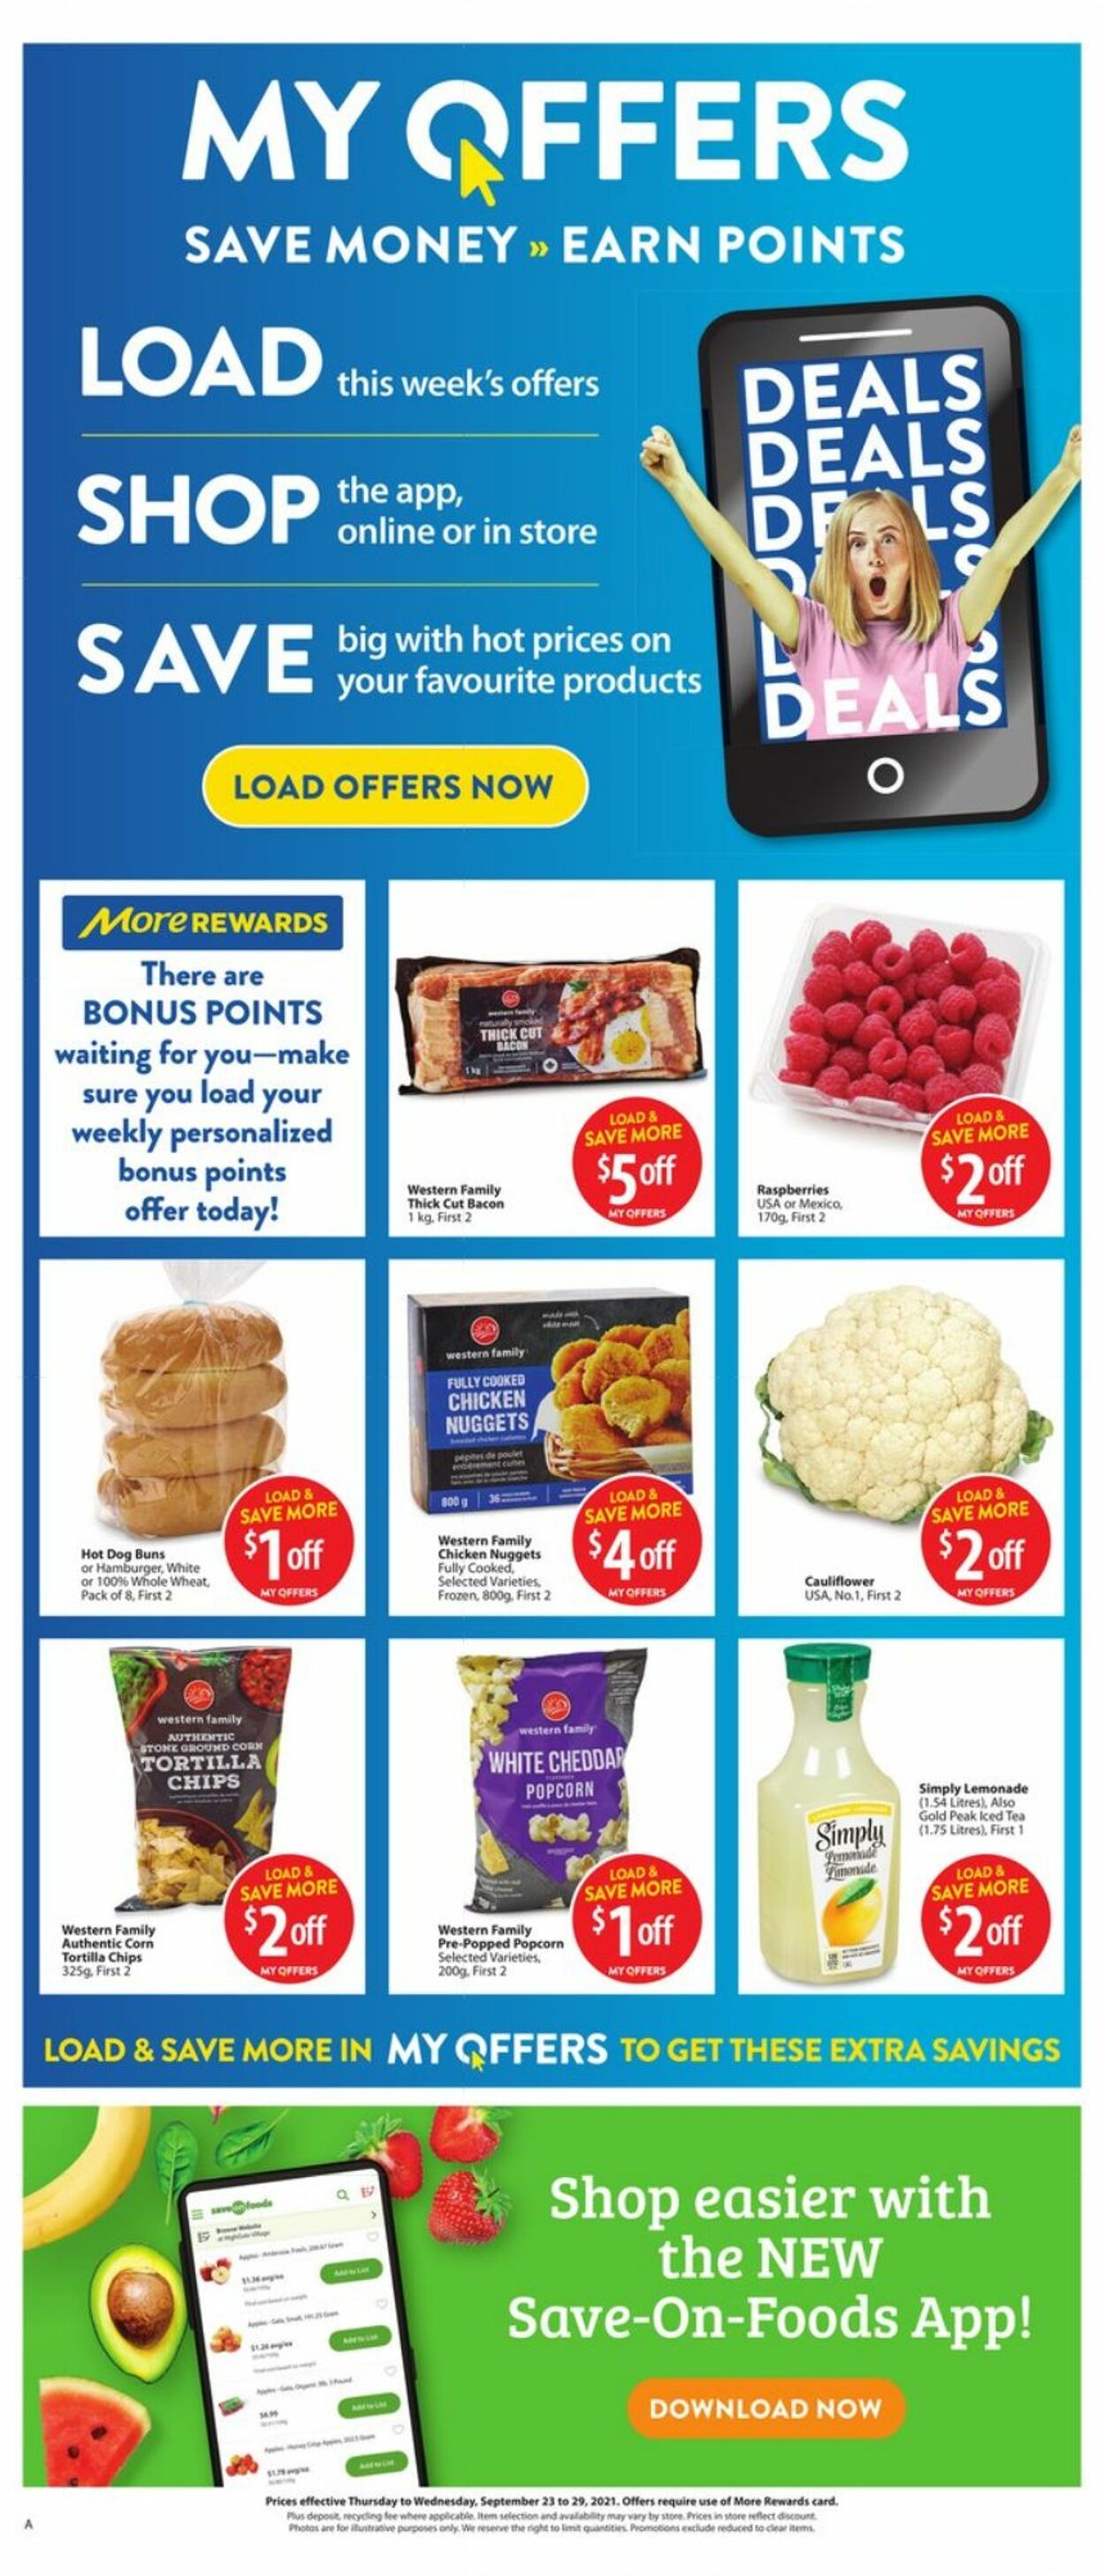 Flyer Save-On-Foods 23.09.2021 - 29.09.2021